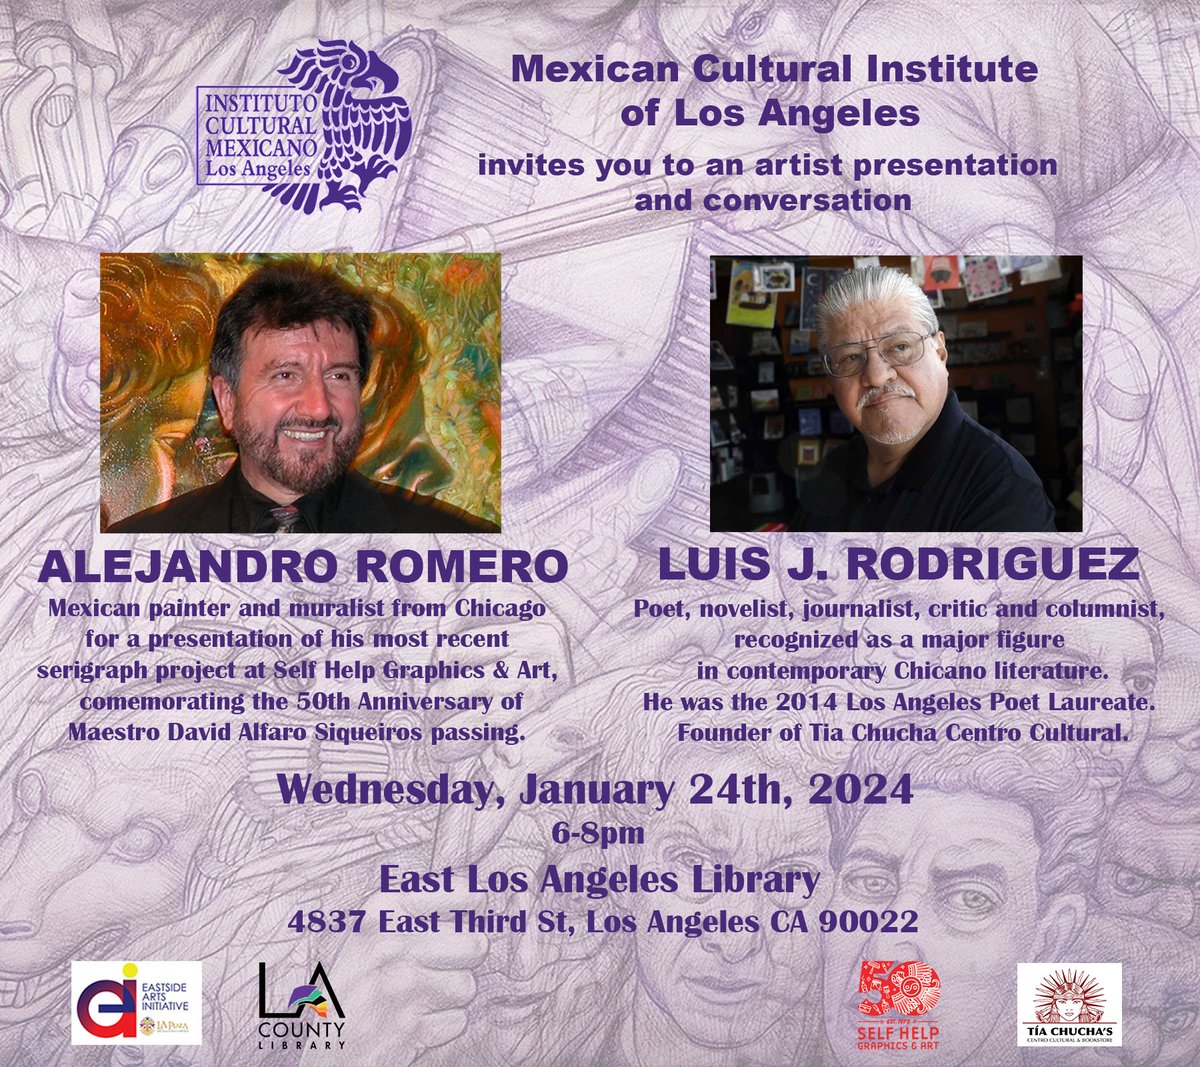 This Wednesday evening I'll be in dialogue with renown Chicago muralist Alejandro Romero at East Los Angeles Public Library at 6 pm. Please join us!